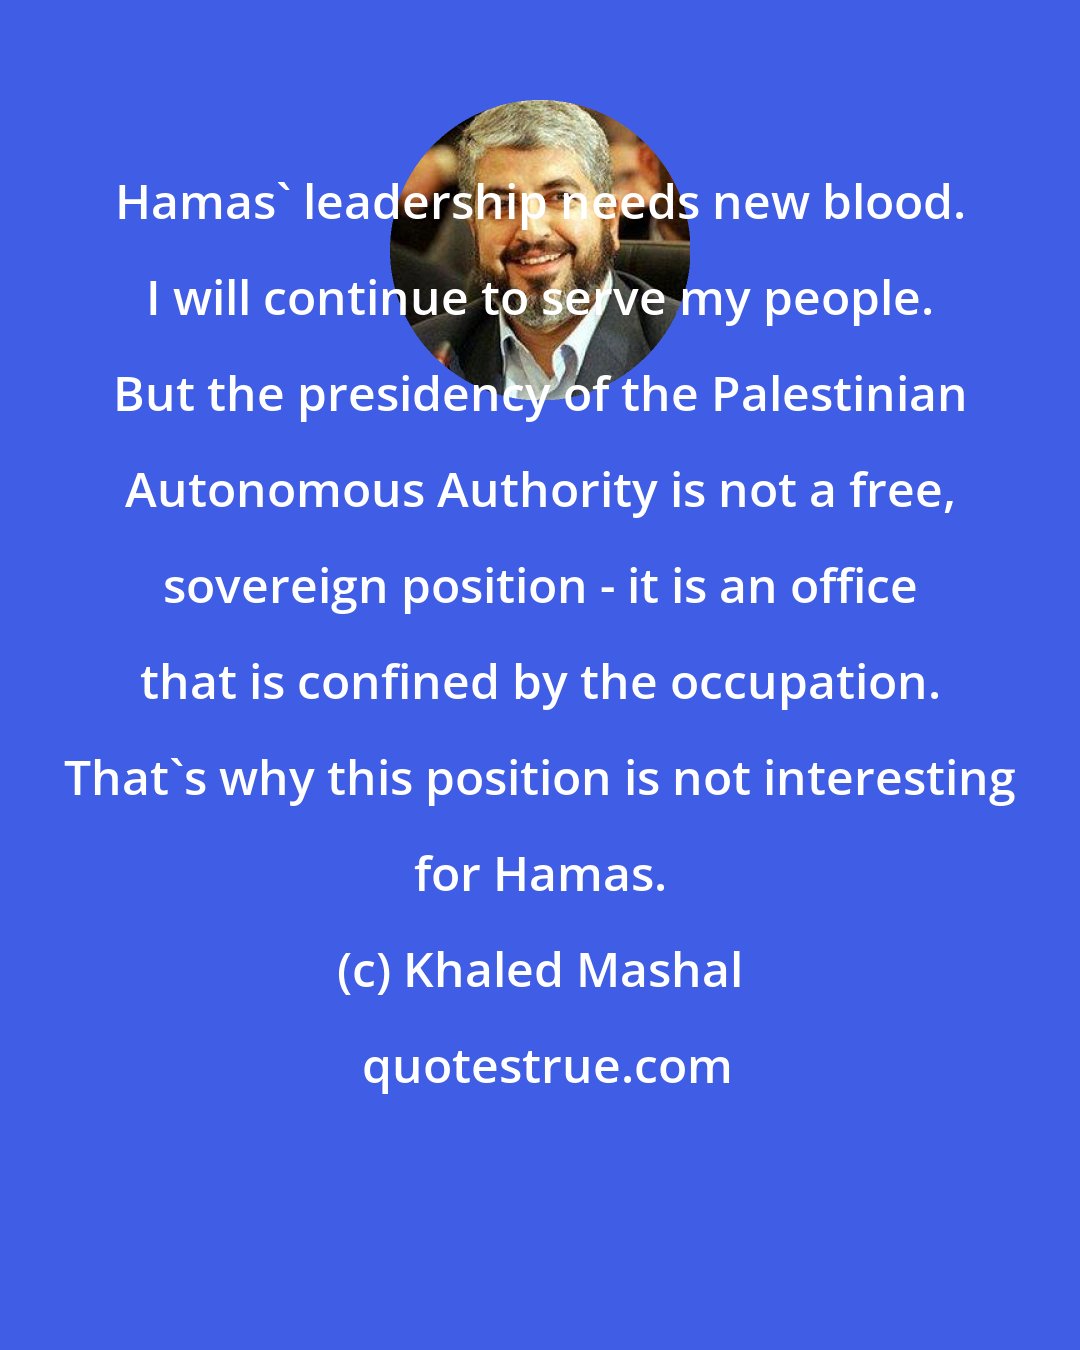 Khaled Mashal: Hamas' leadership needs new blood. I will continue to serve my people. But the presidency of the Palestinian Autonomous Authority is not a free, sovereign position - it is an office that is confined by the occupation. That's why this position is not interesting for Hamas.